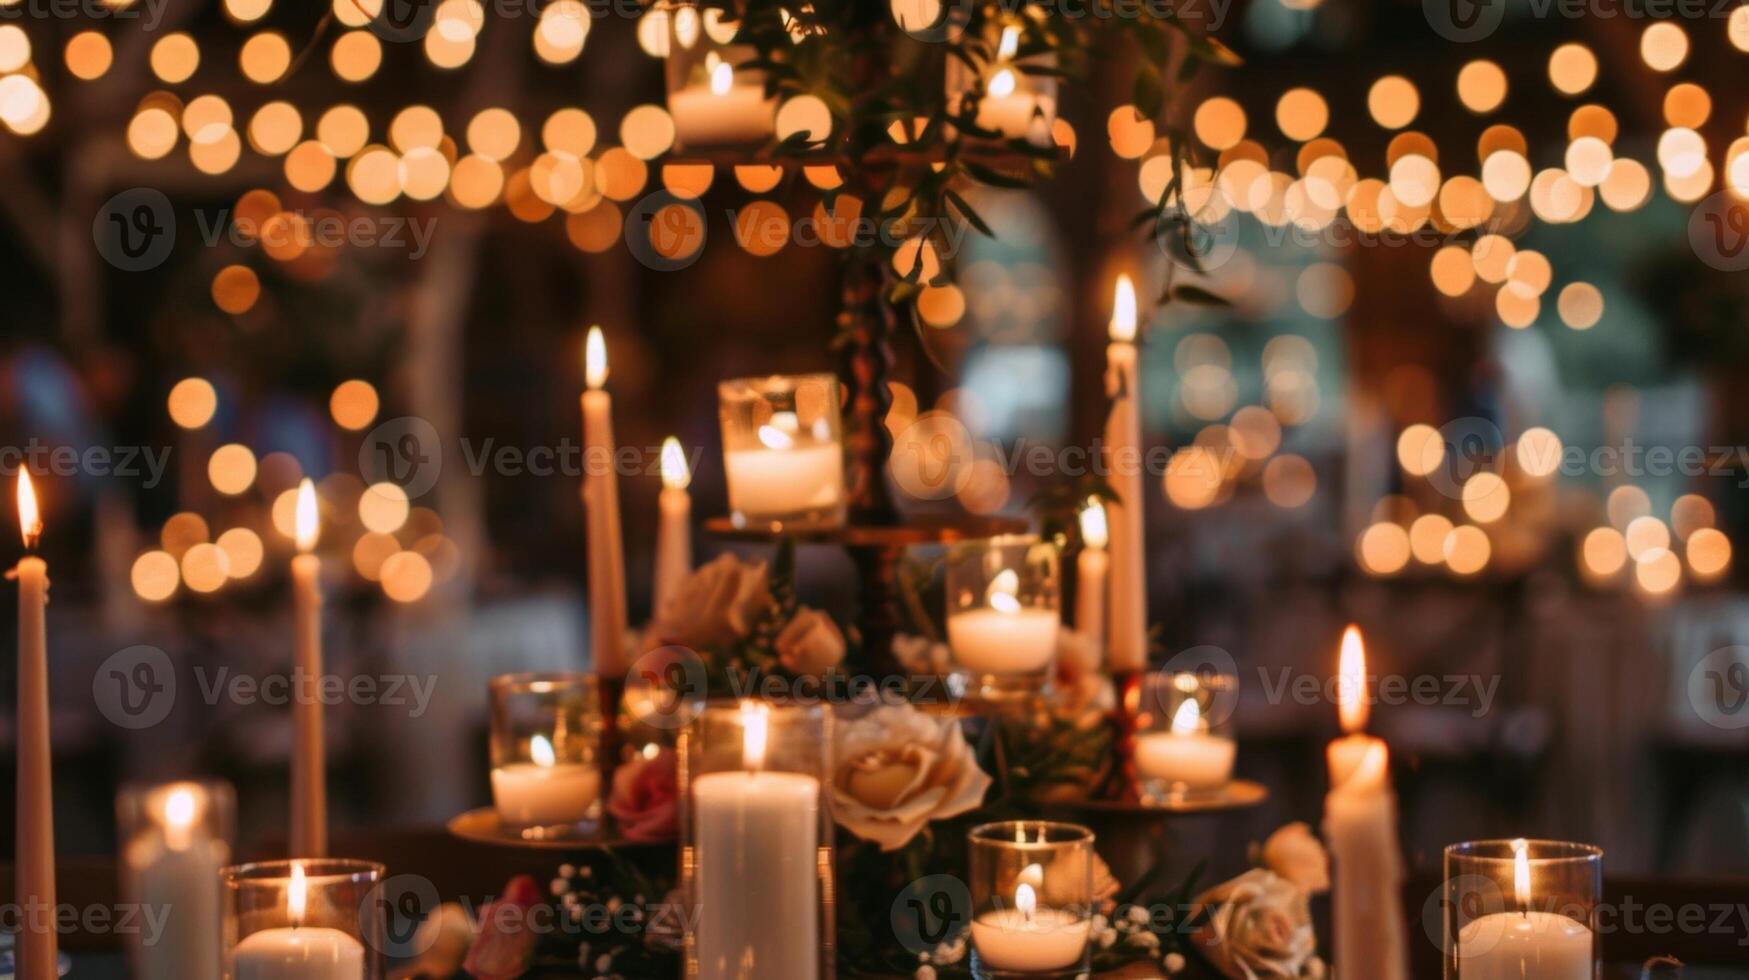 A mix of tealight candles and tapered candles are displayed on the multilevel platforms creating a visually striking centerpiece for this boho chic wedding reception. 2d flat cartoon photo